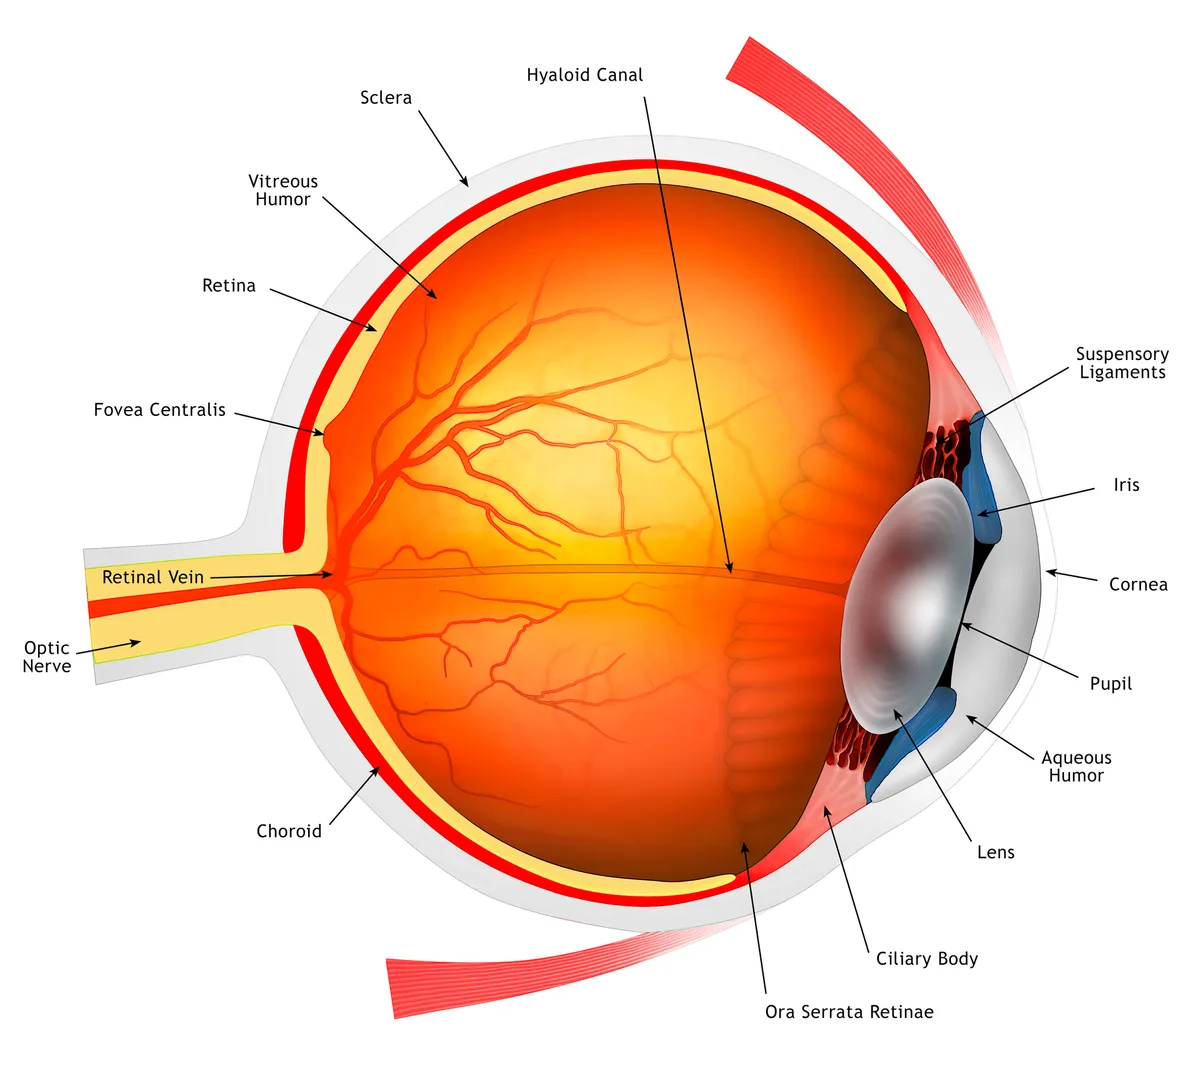 Illustration of the anatomy of a human eye